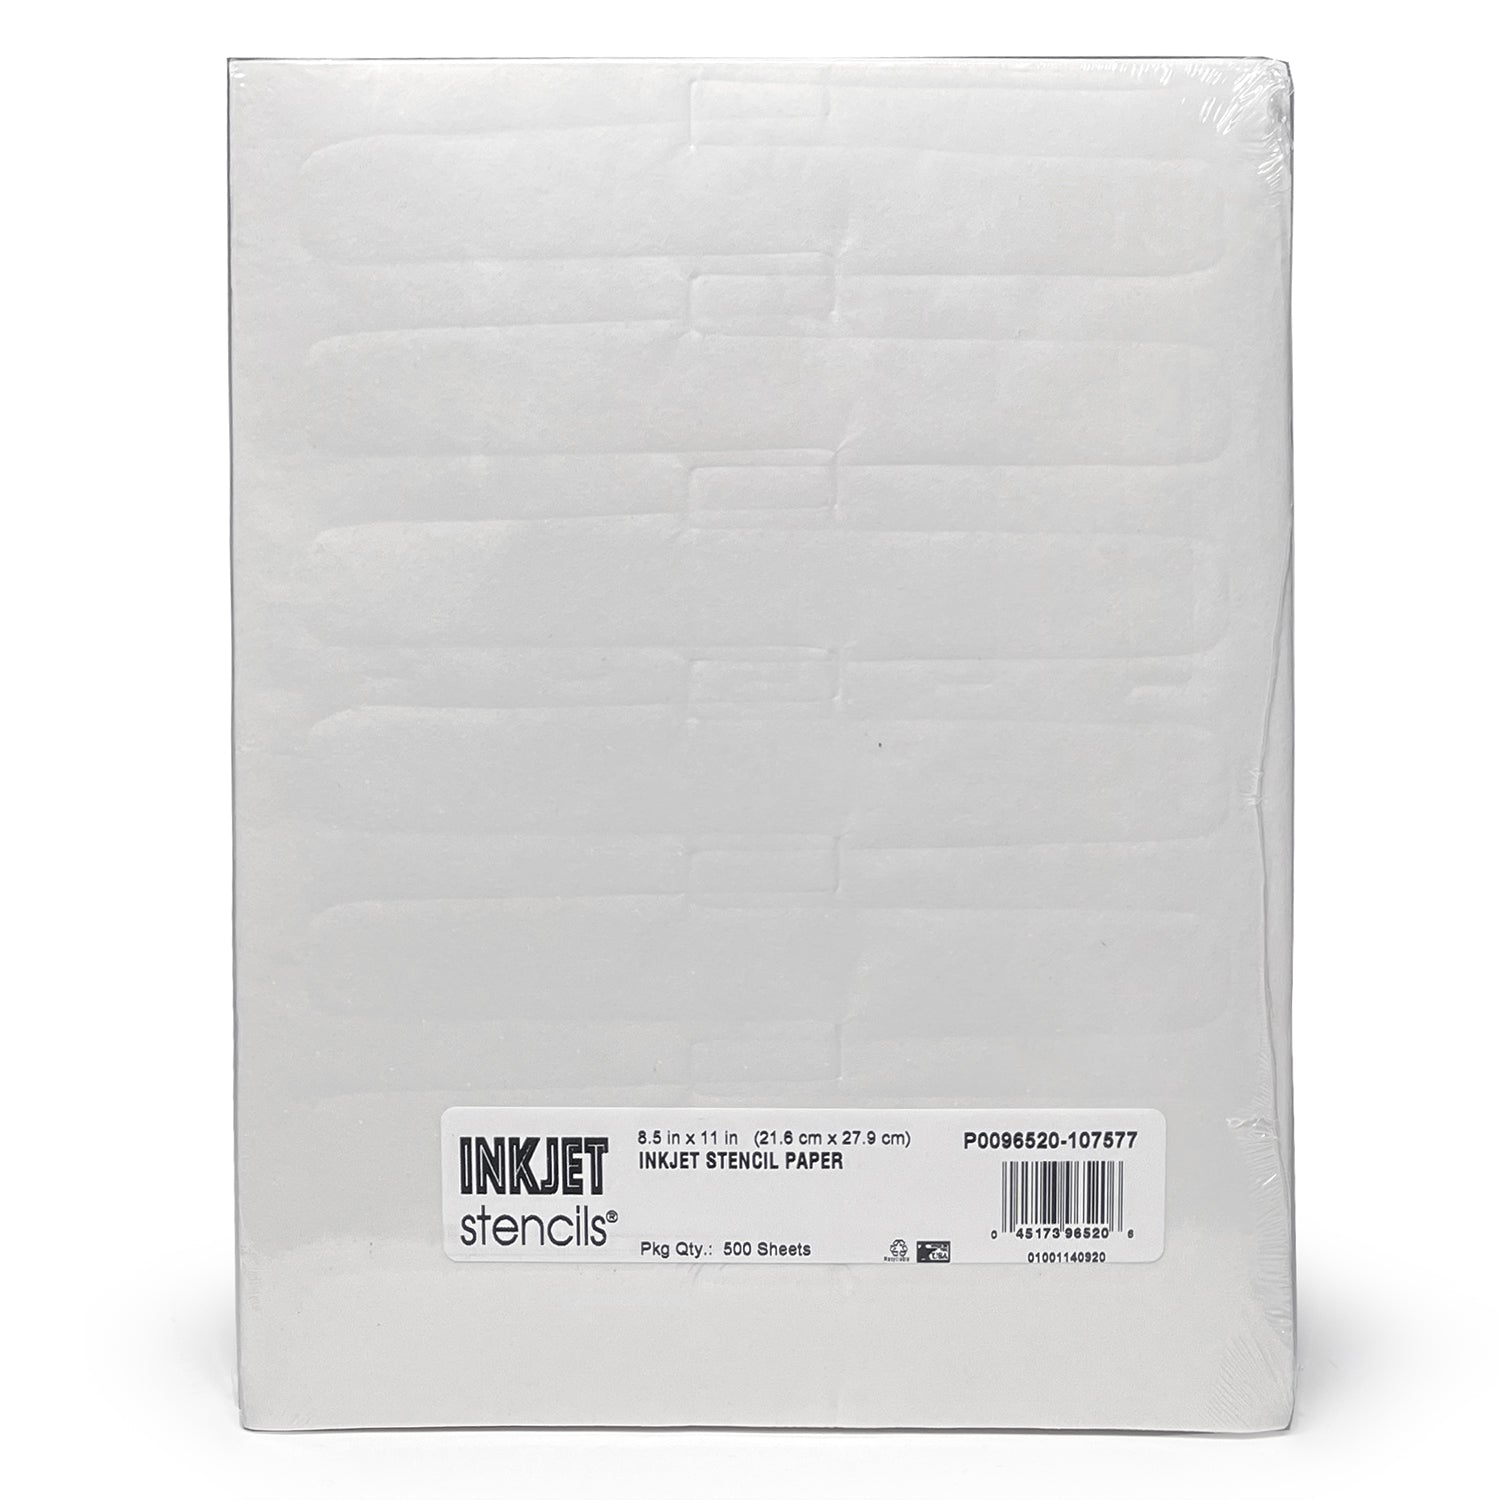 Inkjet Pacon Stencil Tracing Paper 8.5 x 11 / 2 Reams/1000 Sheets